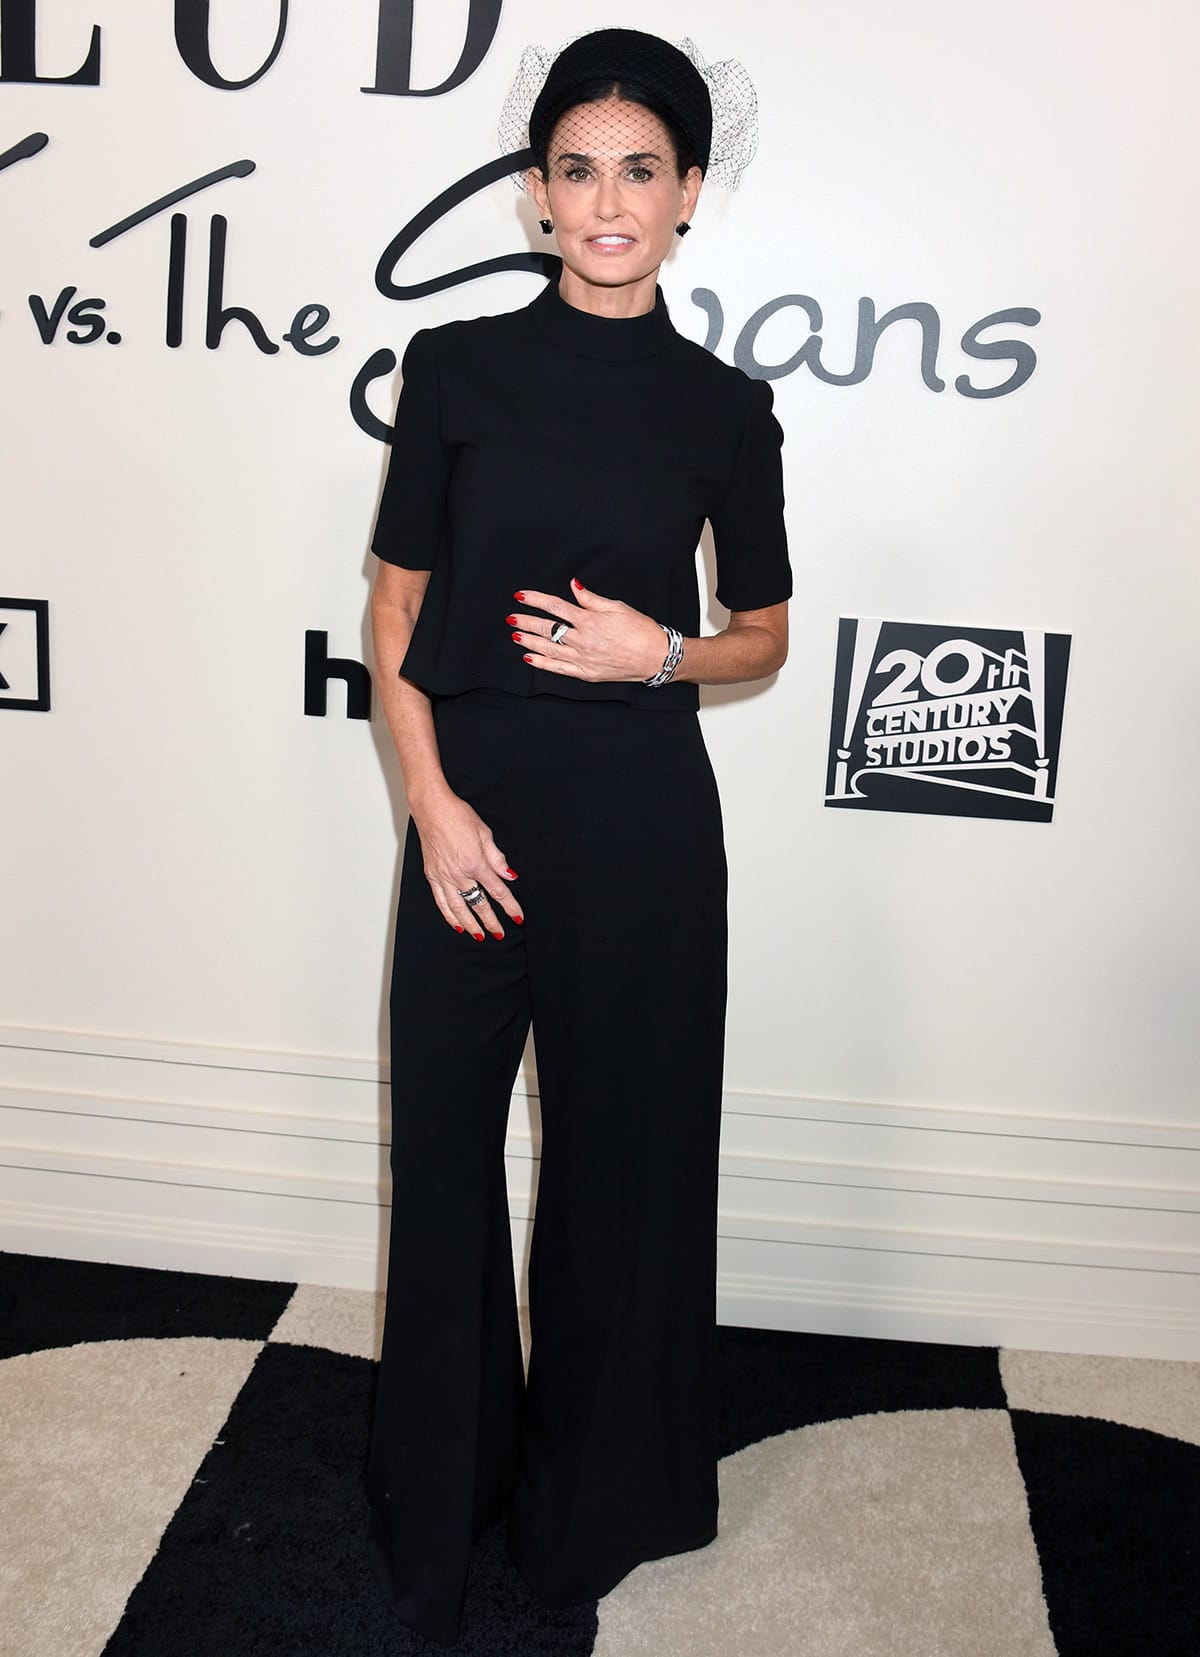 Demi Moore channels retro glamour in an all-black Carolina Herrera ensemble featuring a wool-blend mock-neck tee and flared pants